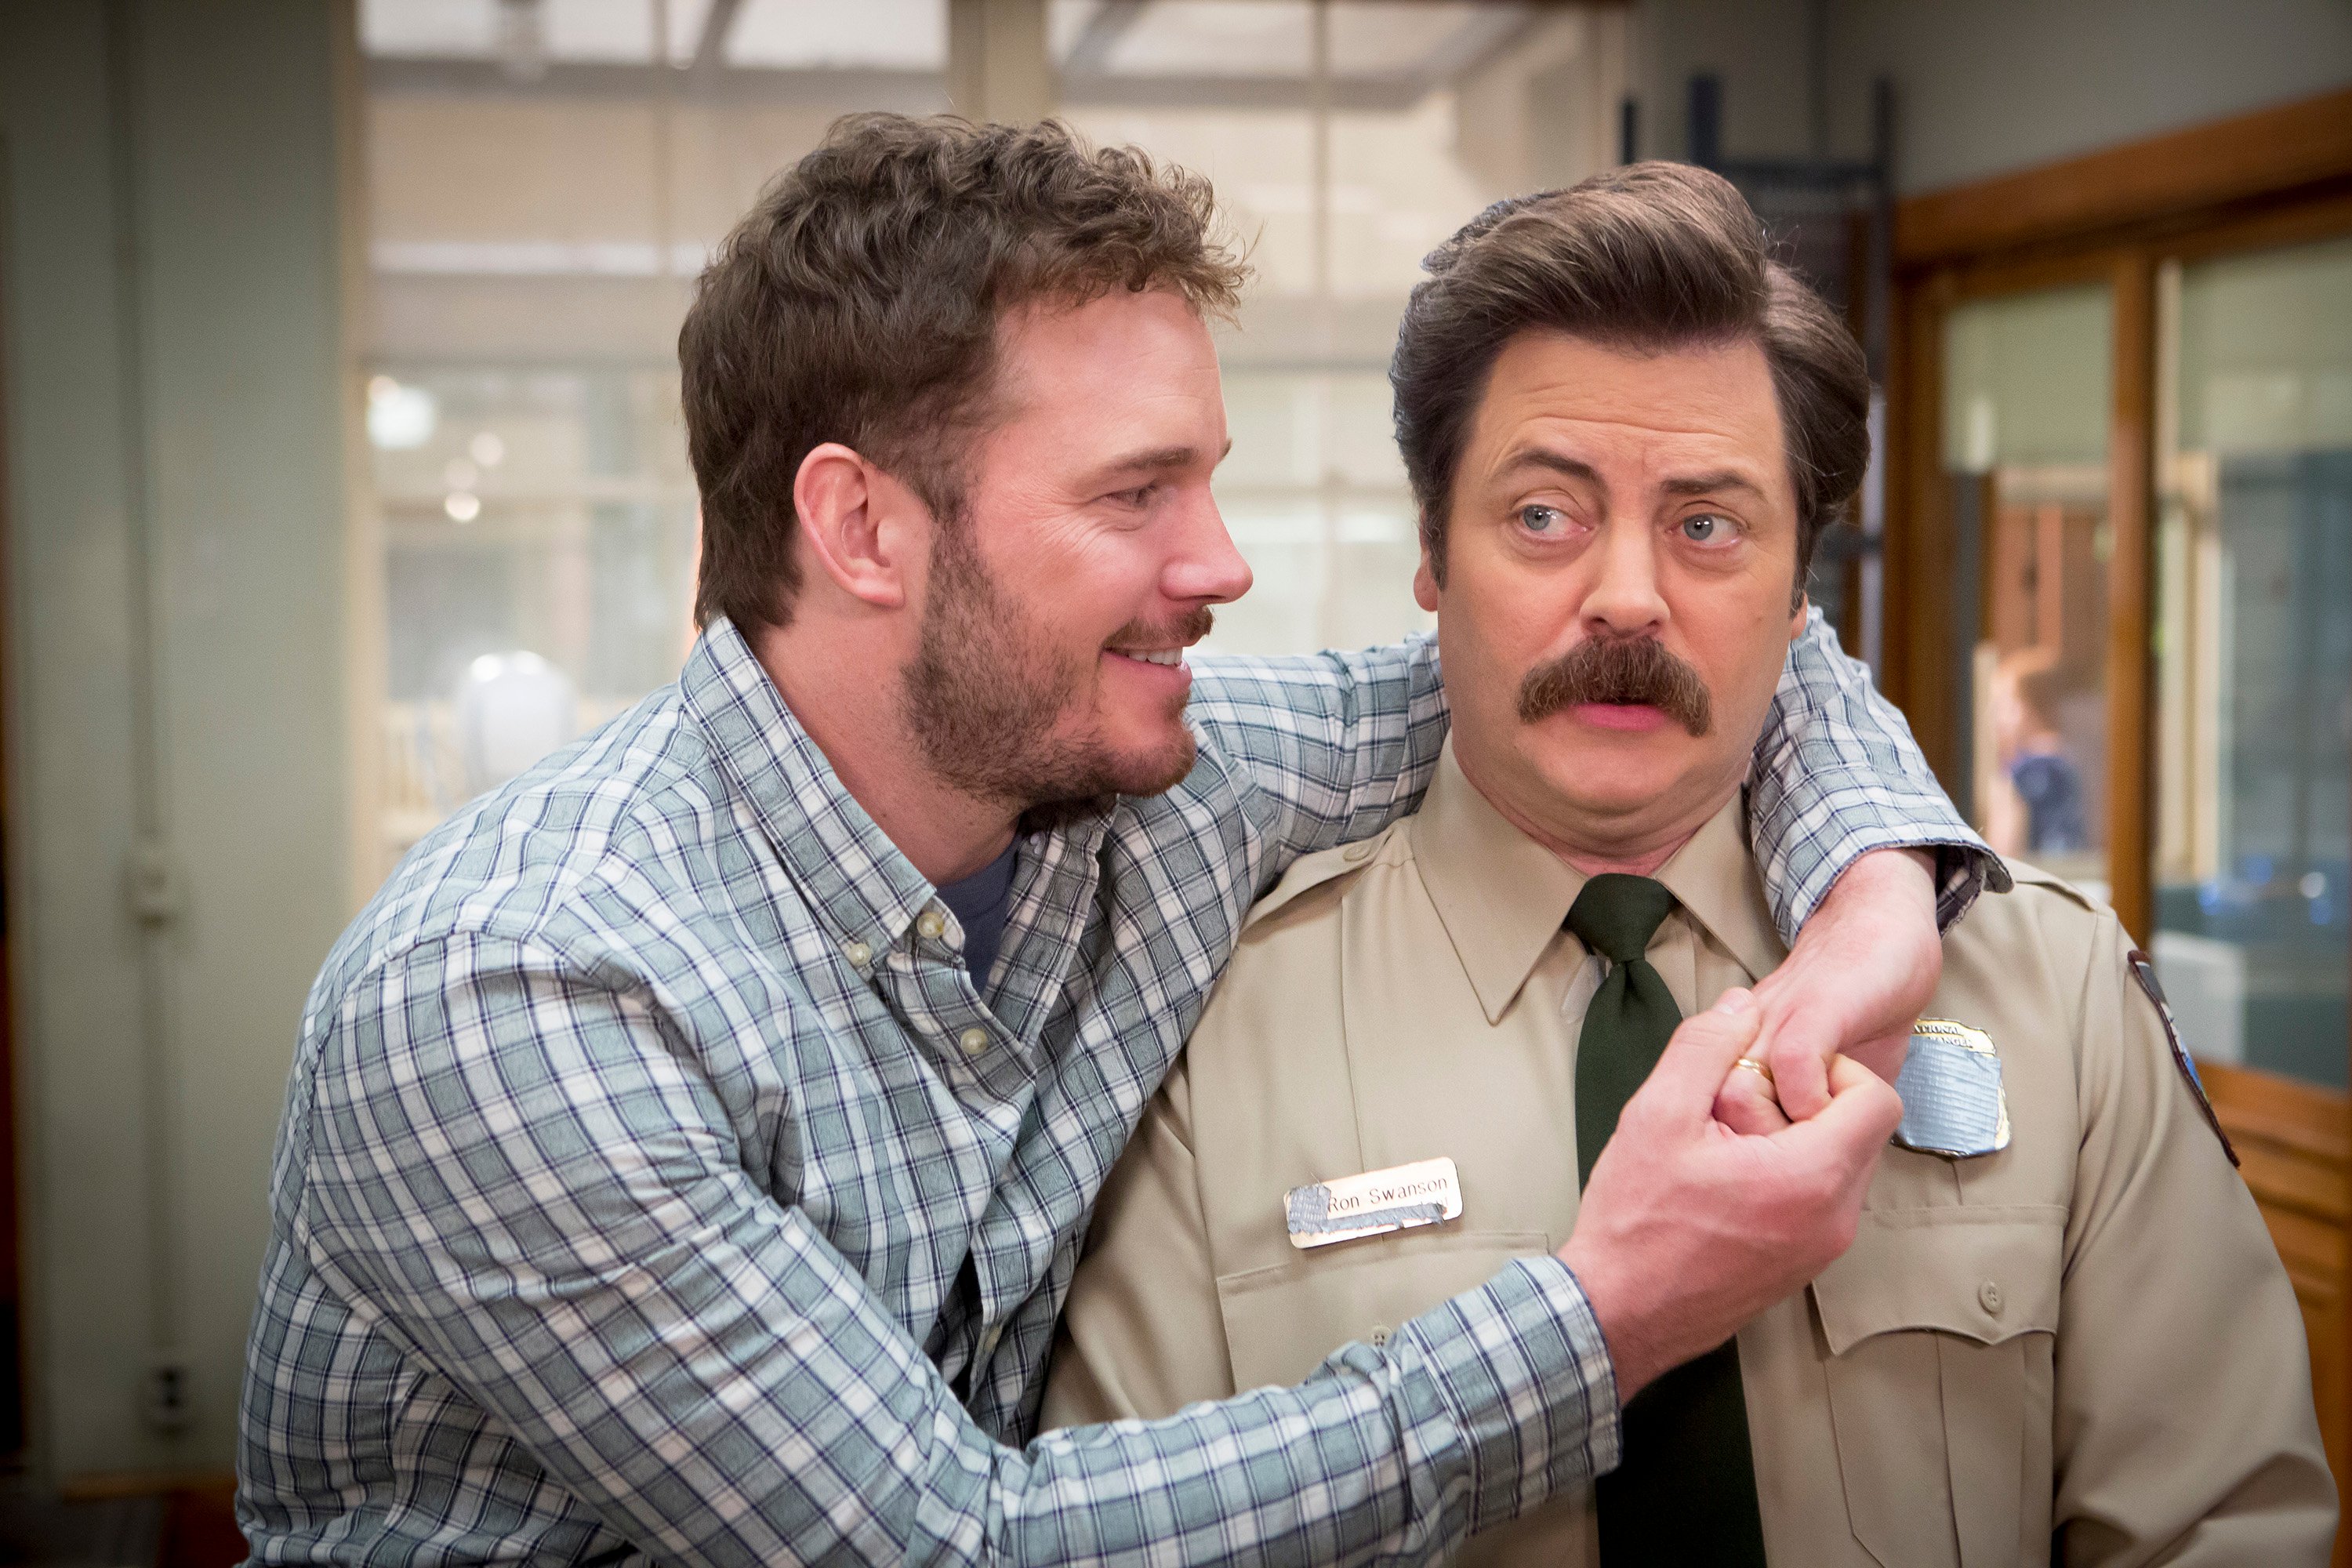 Parks and Recreation cast members Chris Pratt and Nick Offerman